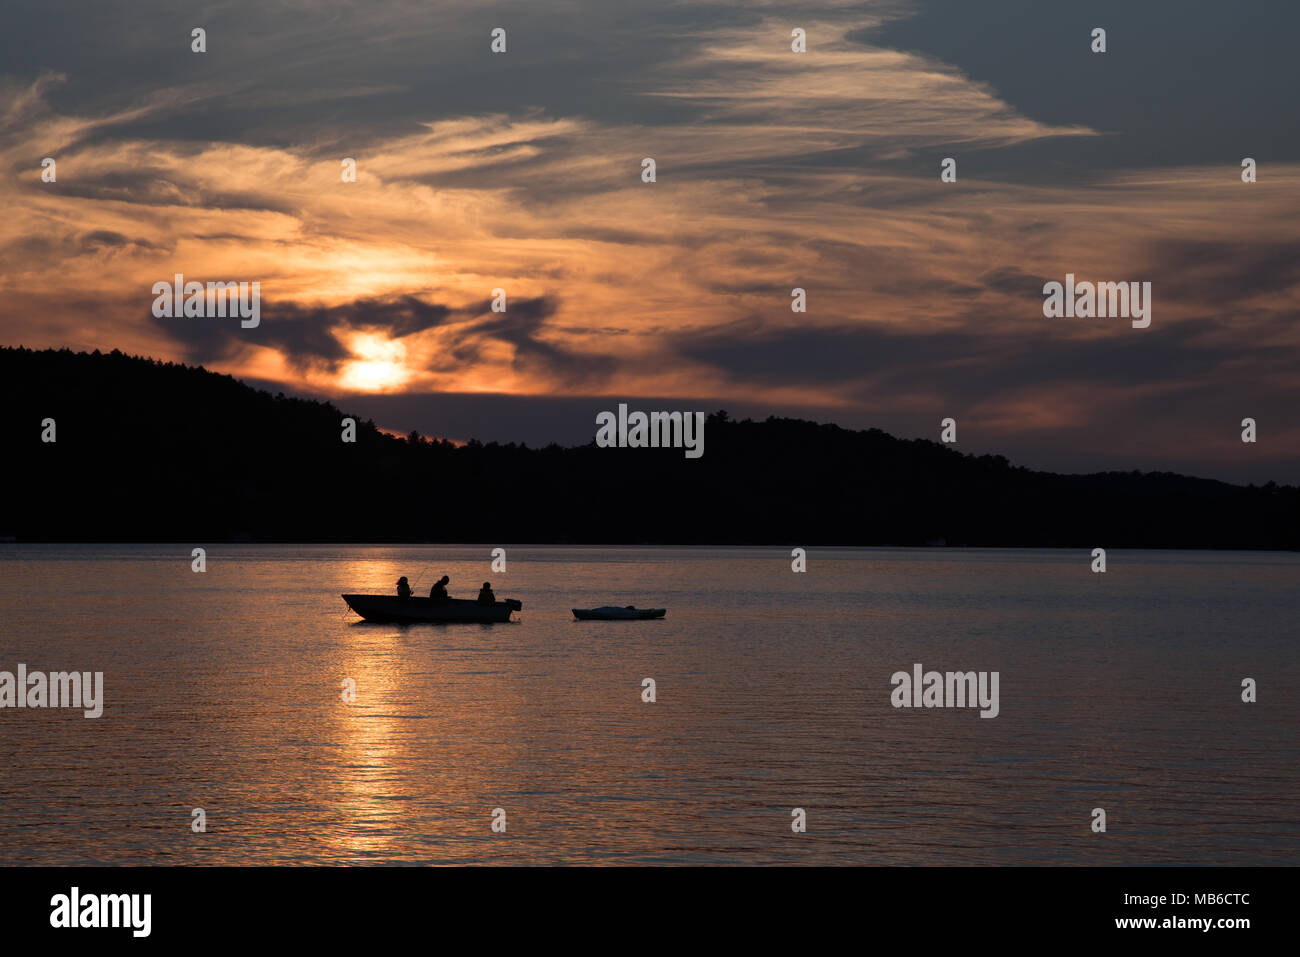 Family fishing adventure on boat and kayak in Ontario lake at sunset Stock Photo